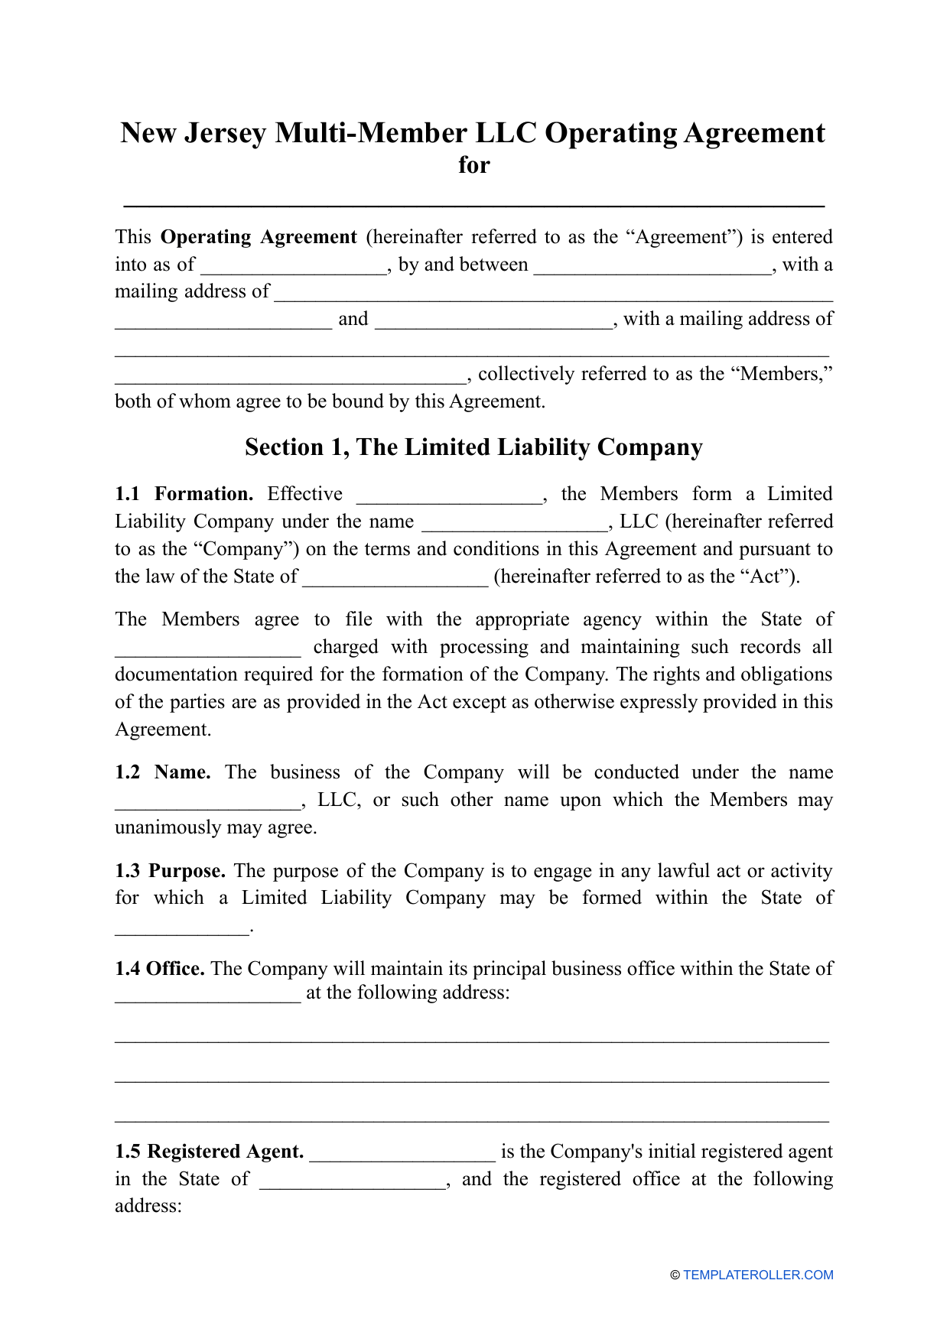 Multi-Member LLC Operating Agreement Template - New Jersey, Page 1